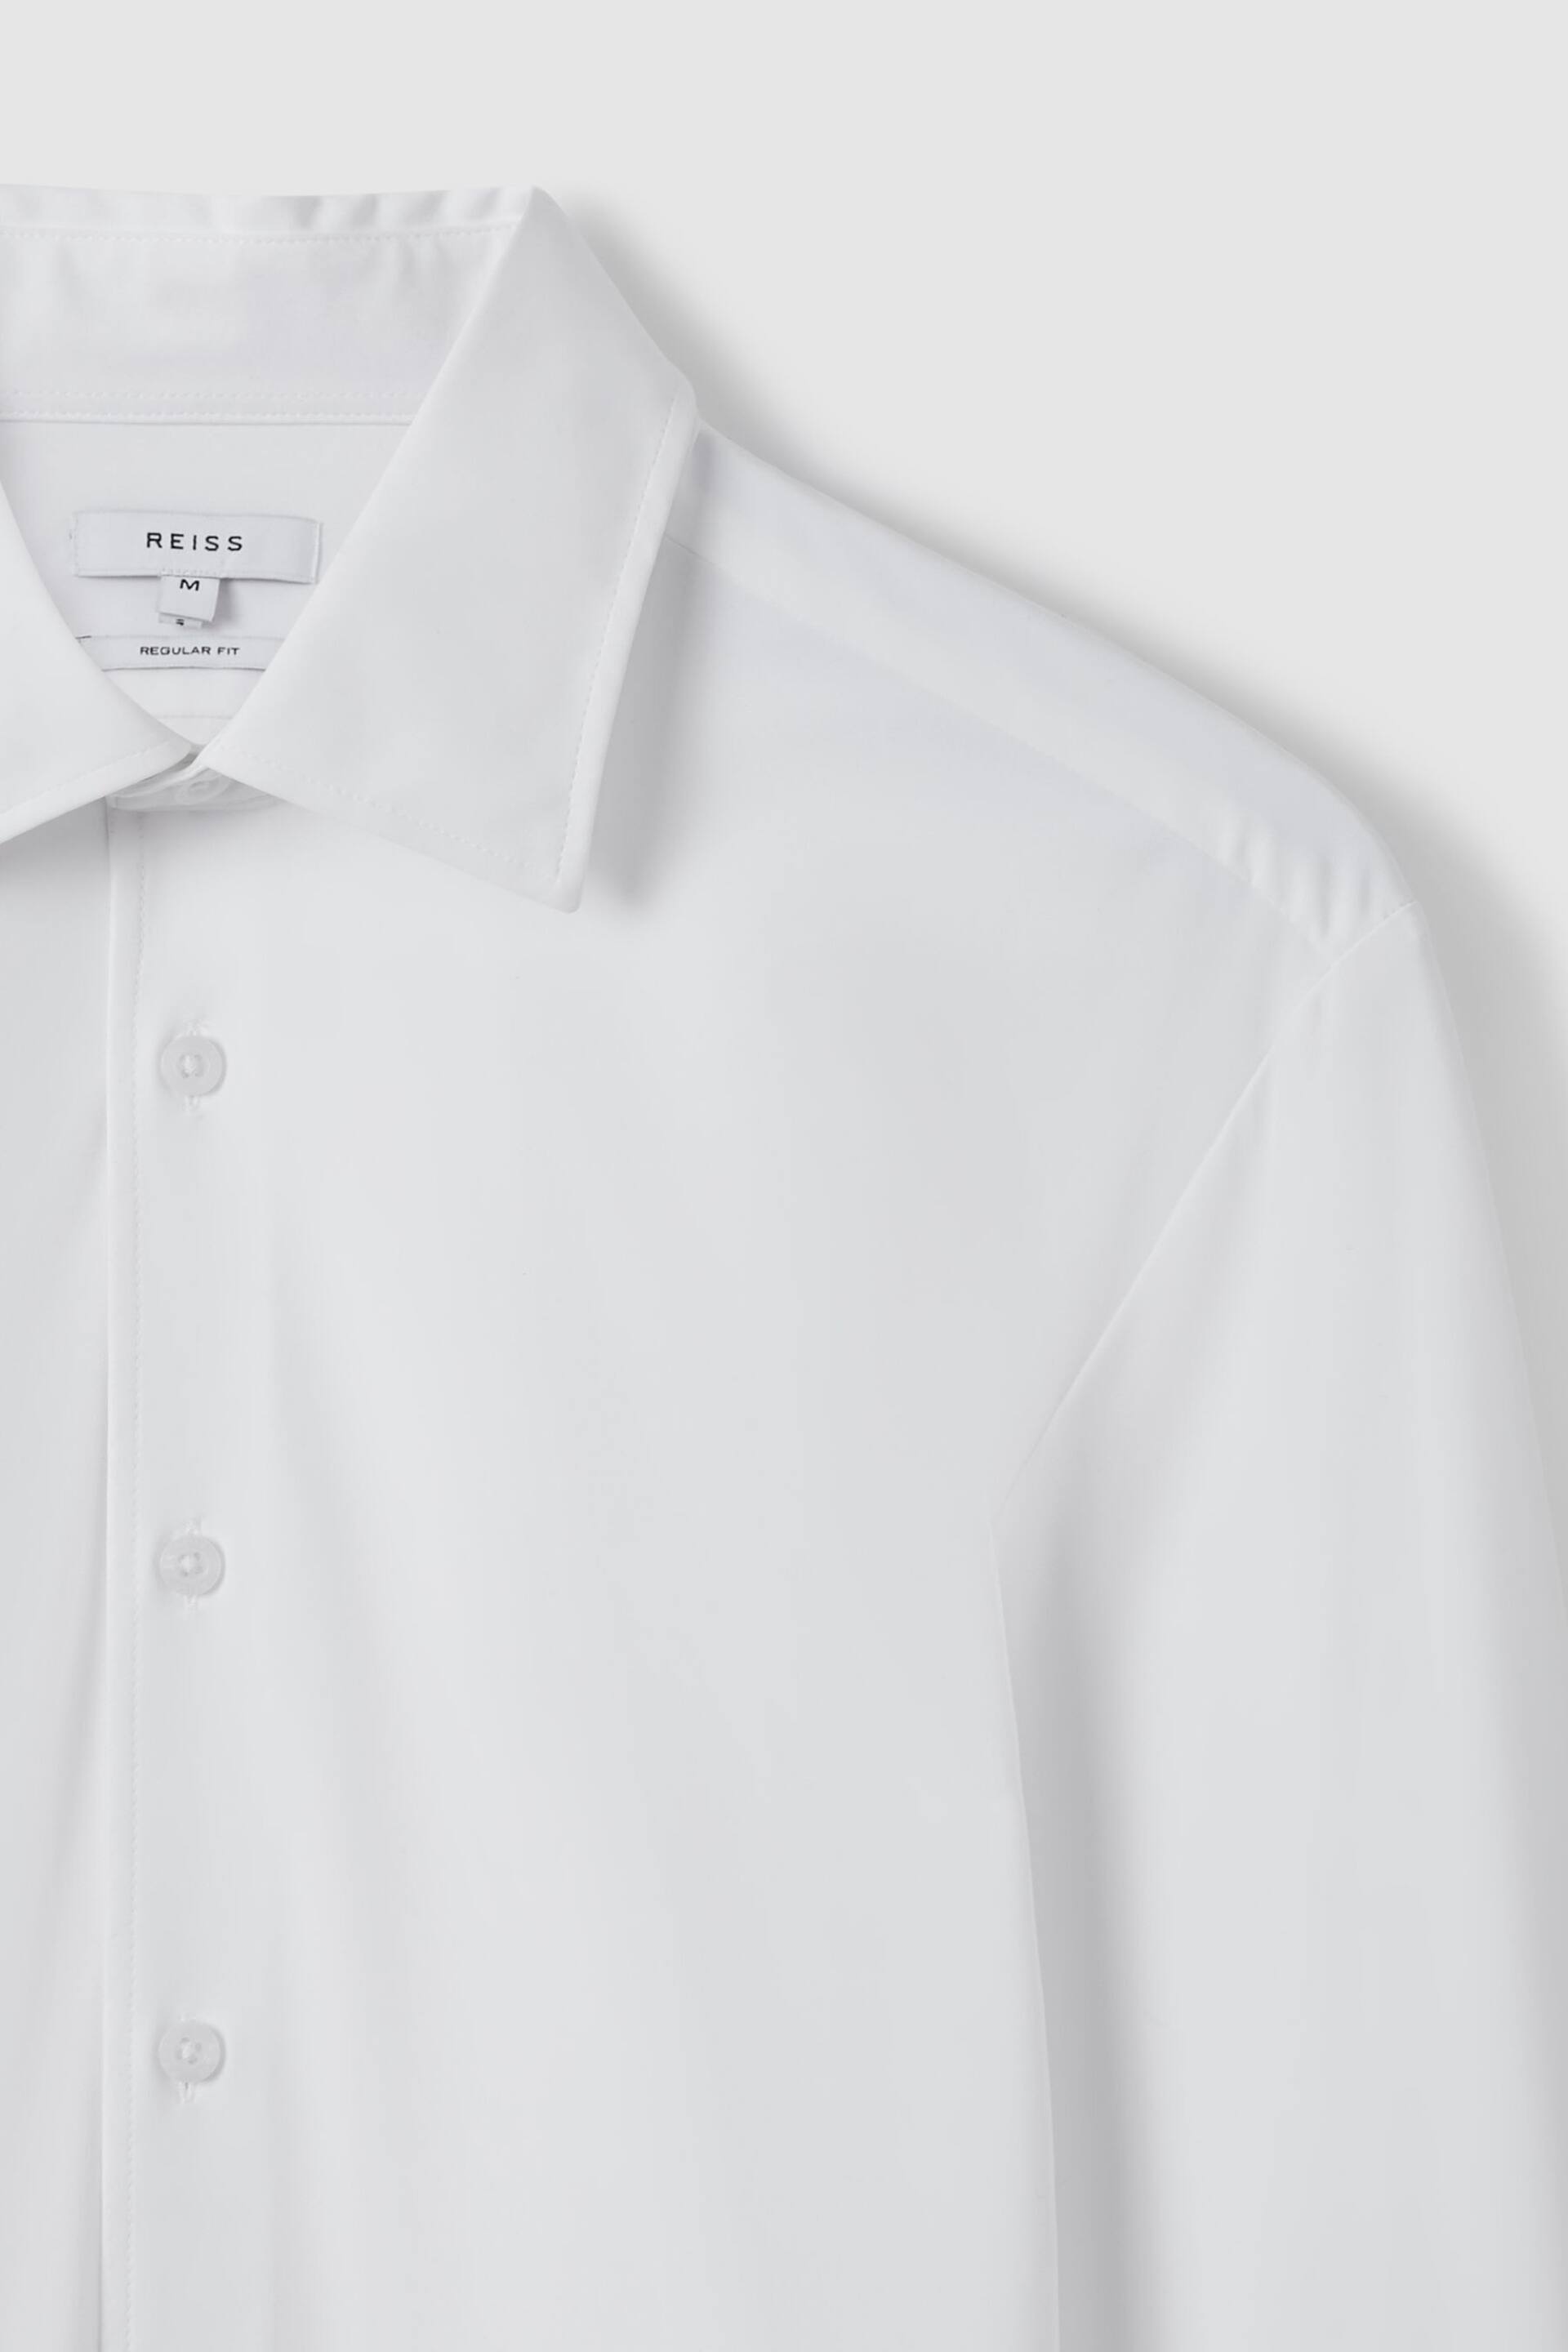 Reiss White Voyager Slim Fit Button-Through Travel Shirt - Image 5 of 8